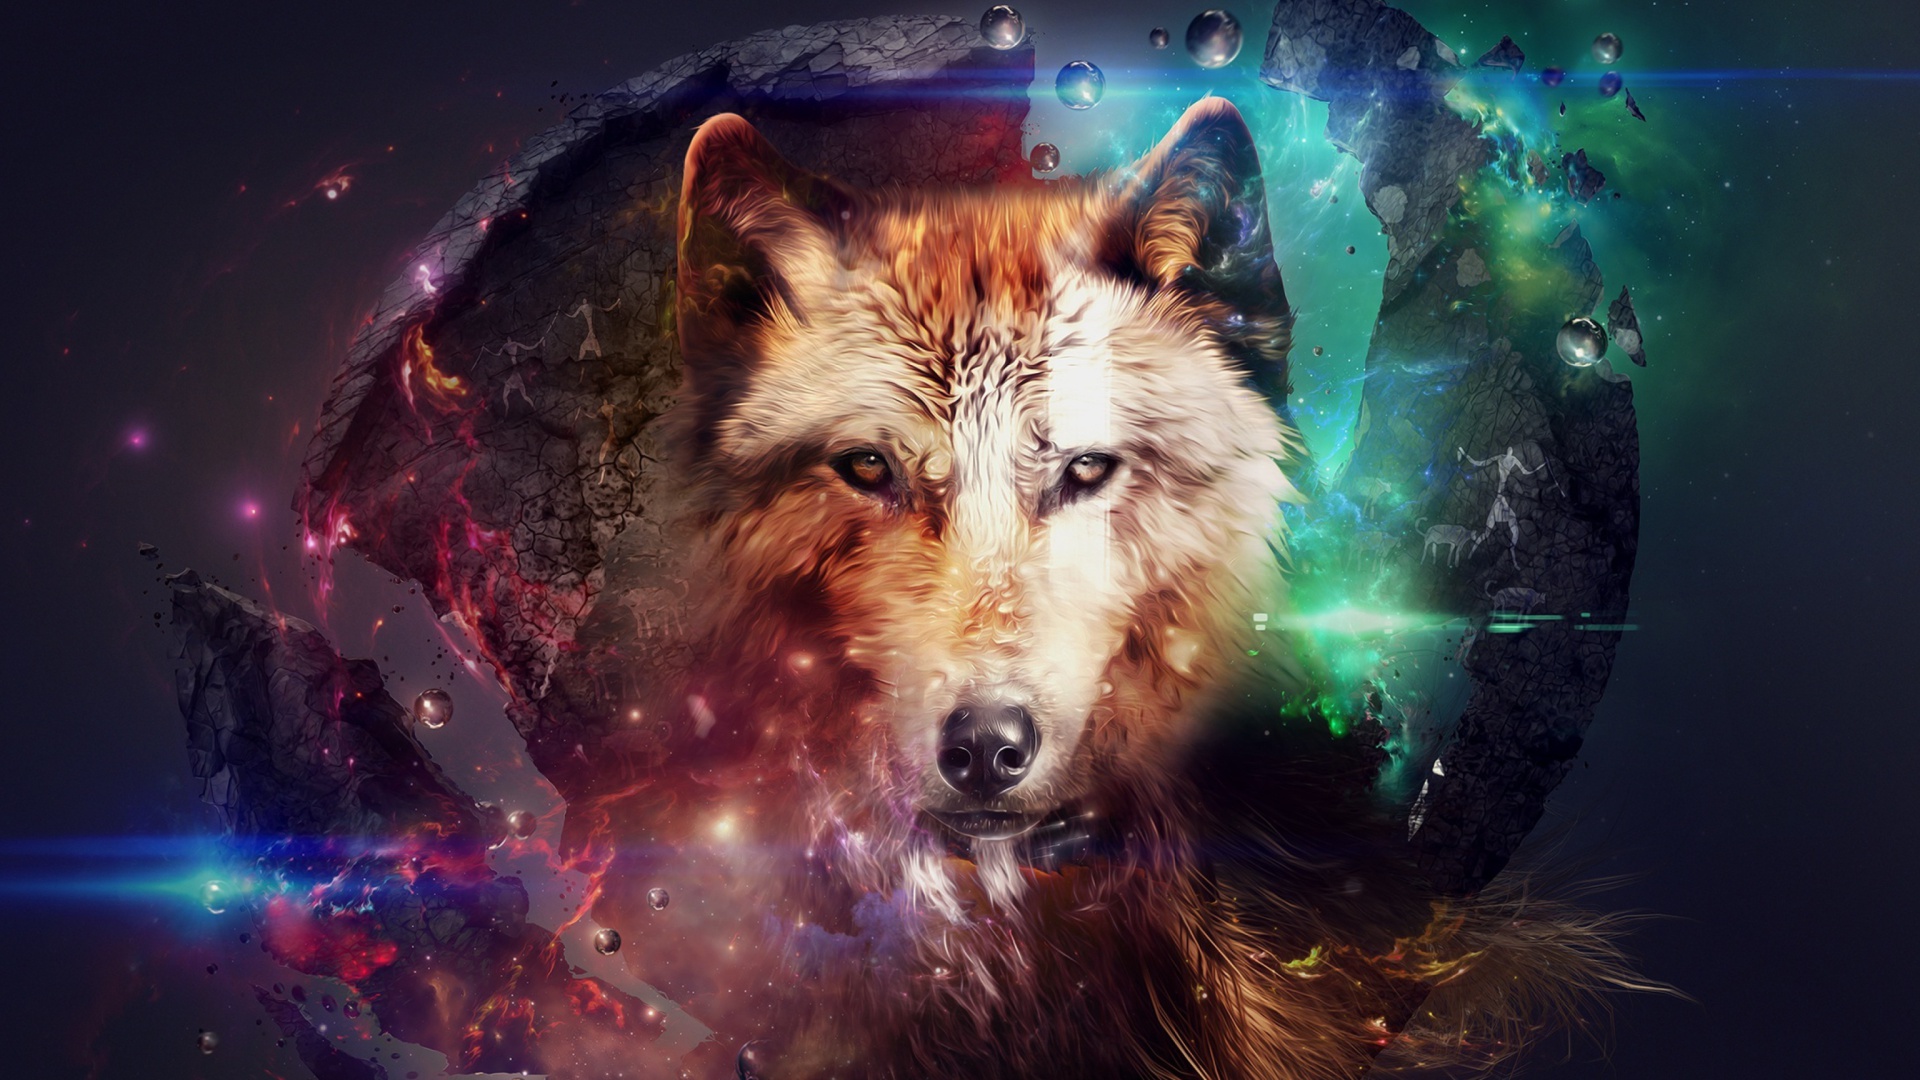 Magic Wolf 1920x1080 free android wallpaper